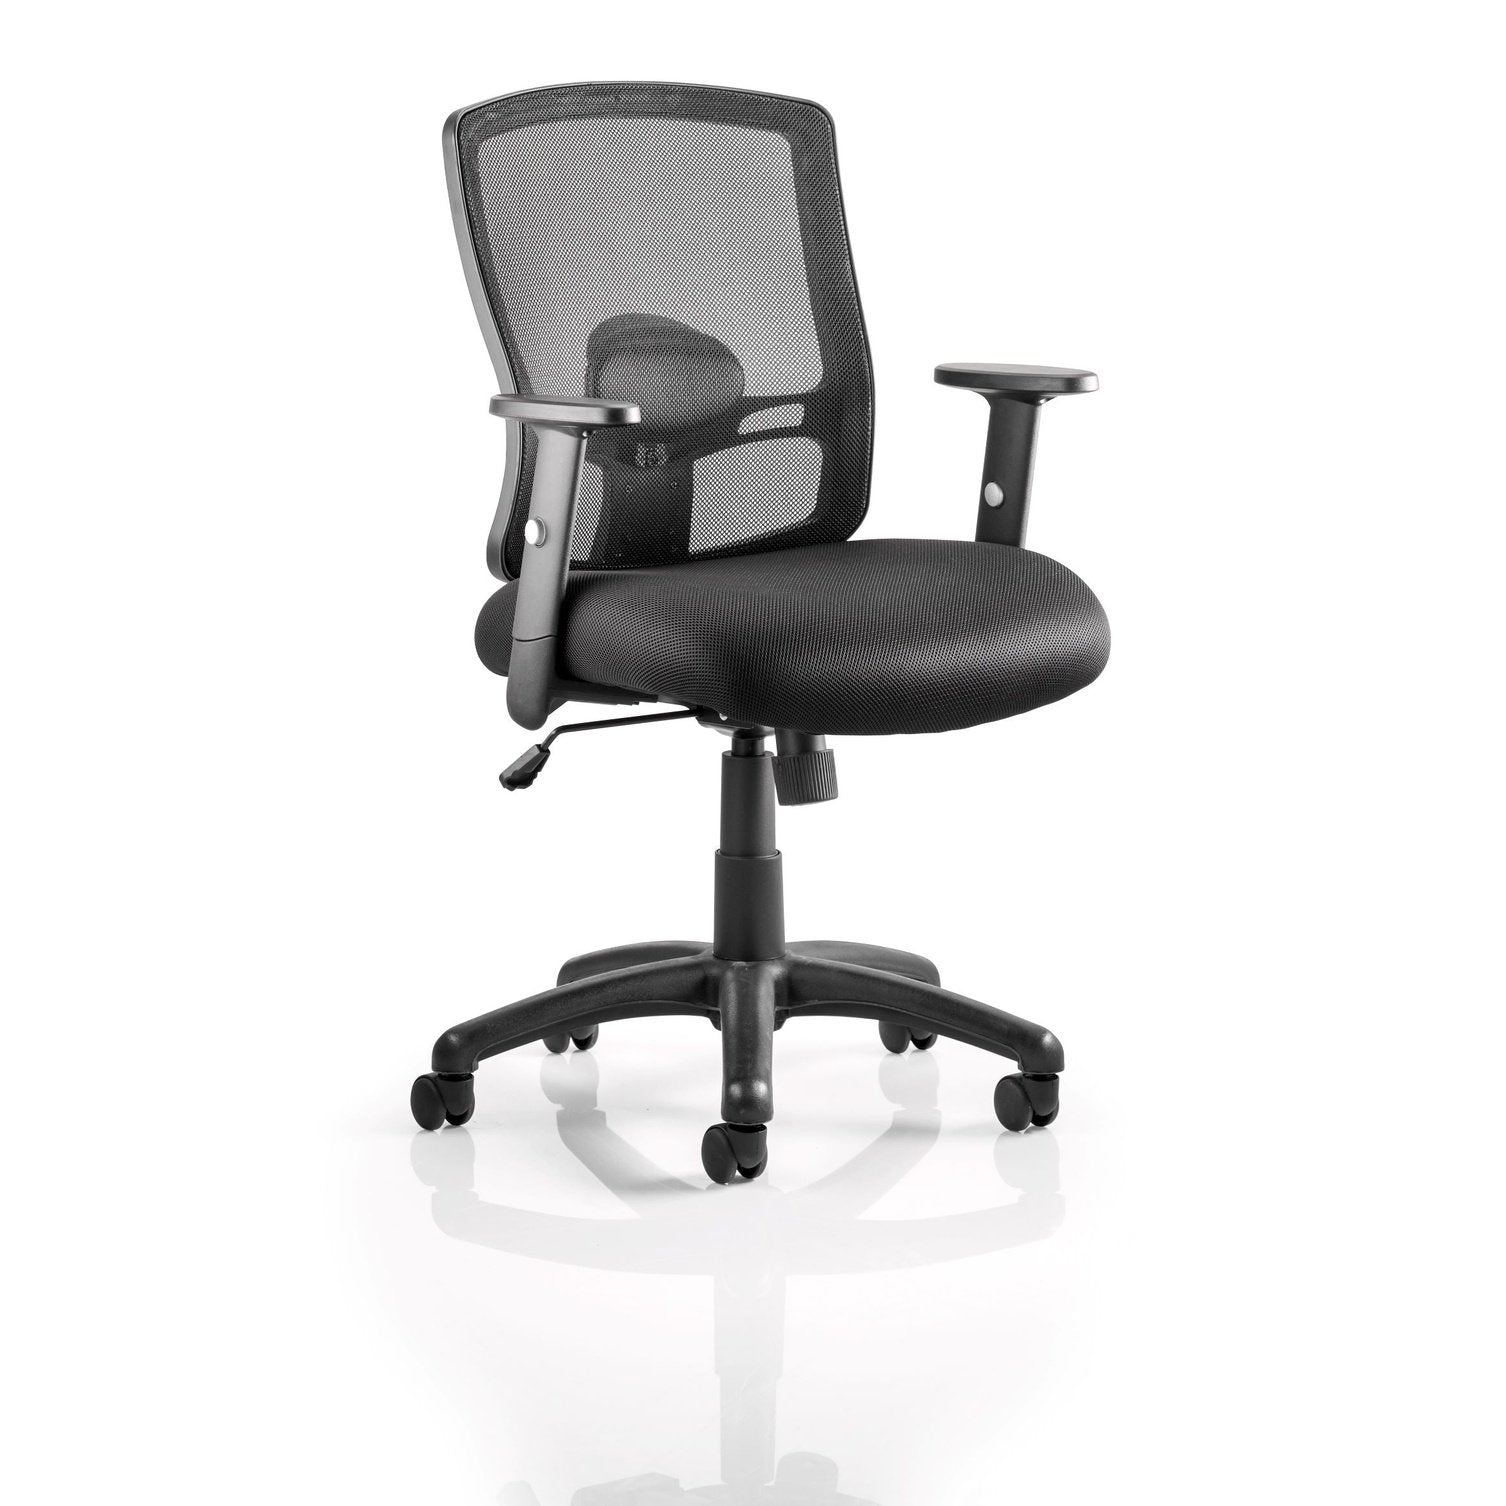 Portland Mesh Back Office Chair - Medium Task Operator Chair with Adjustable Arms, Lumbar Support & 125kg Capacity - Ideal for 8 Hour Daily Use